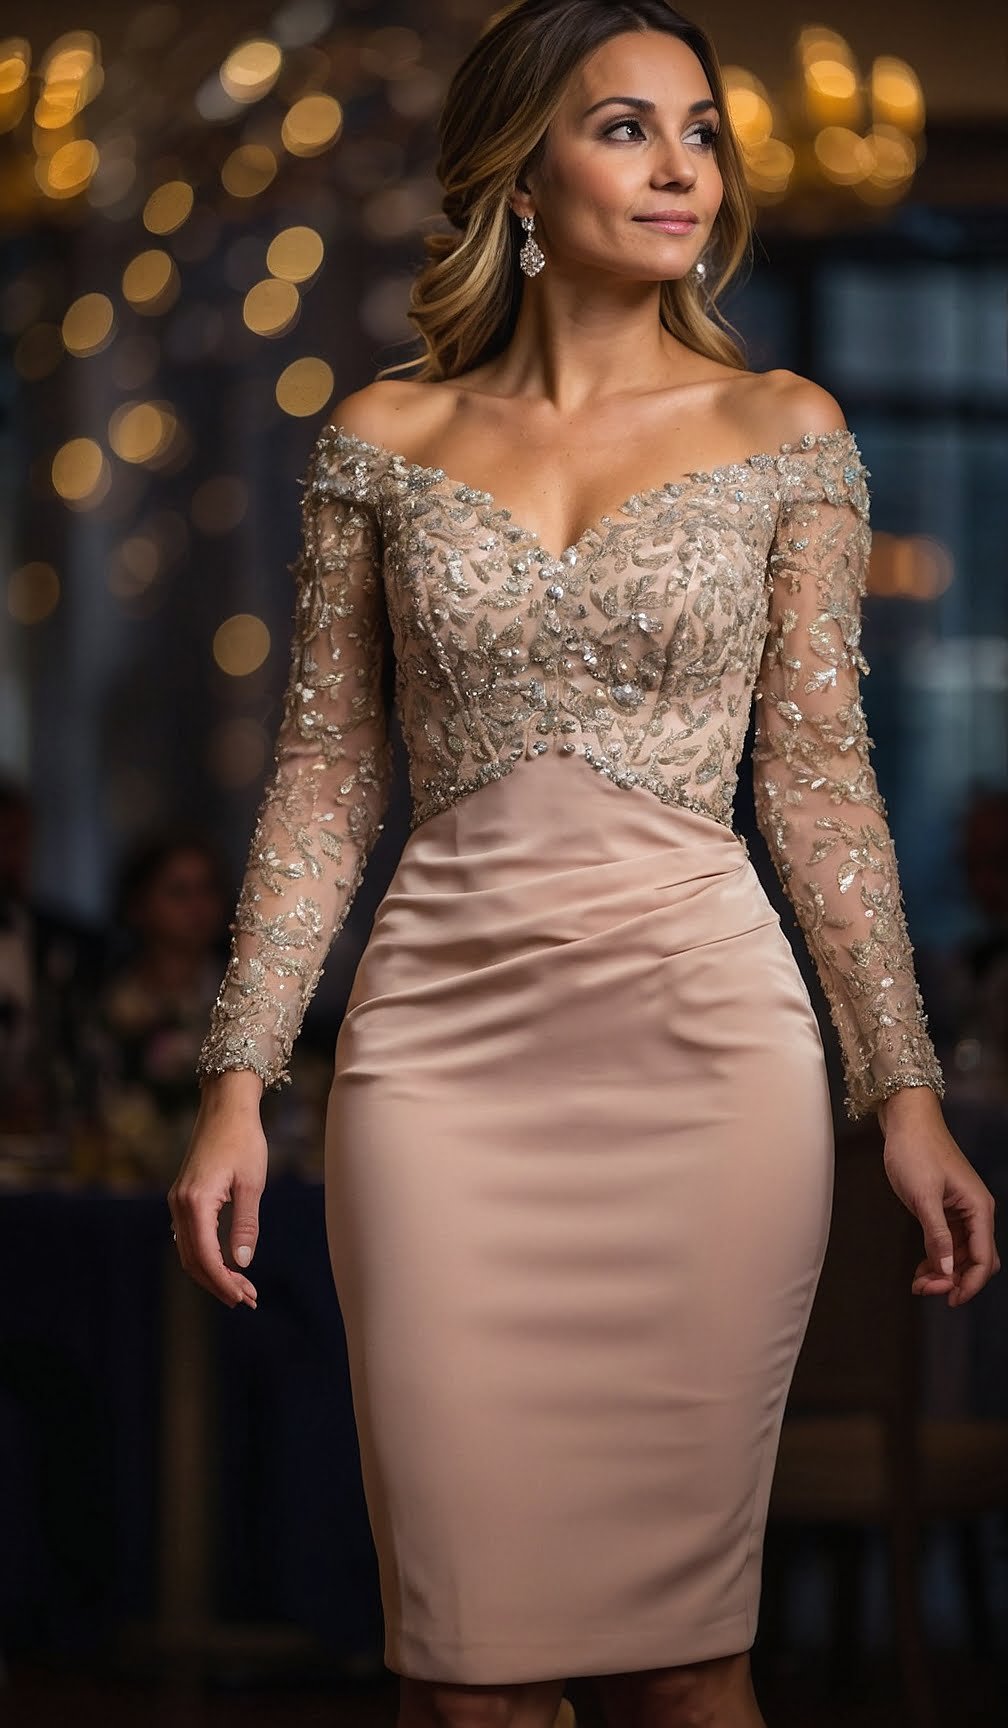 Off-Shoulder Glittering Lace Sheath Dress with Nude Illusion